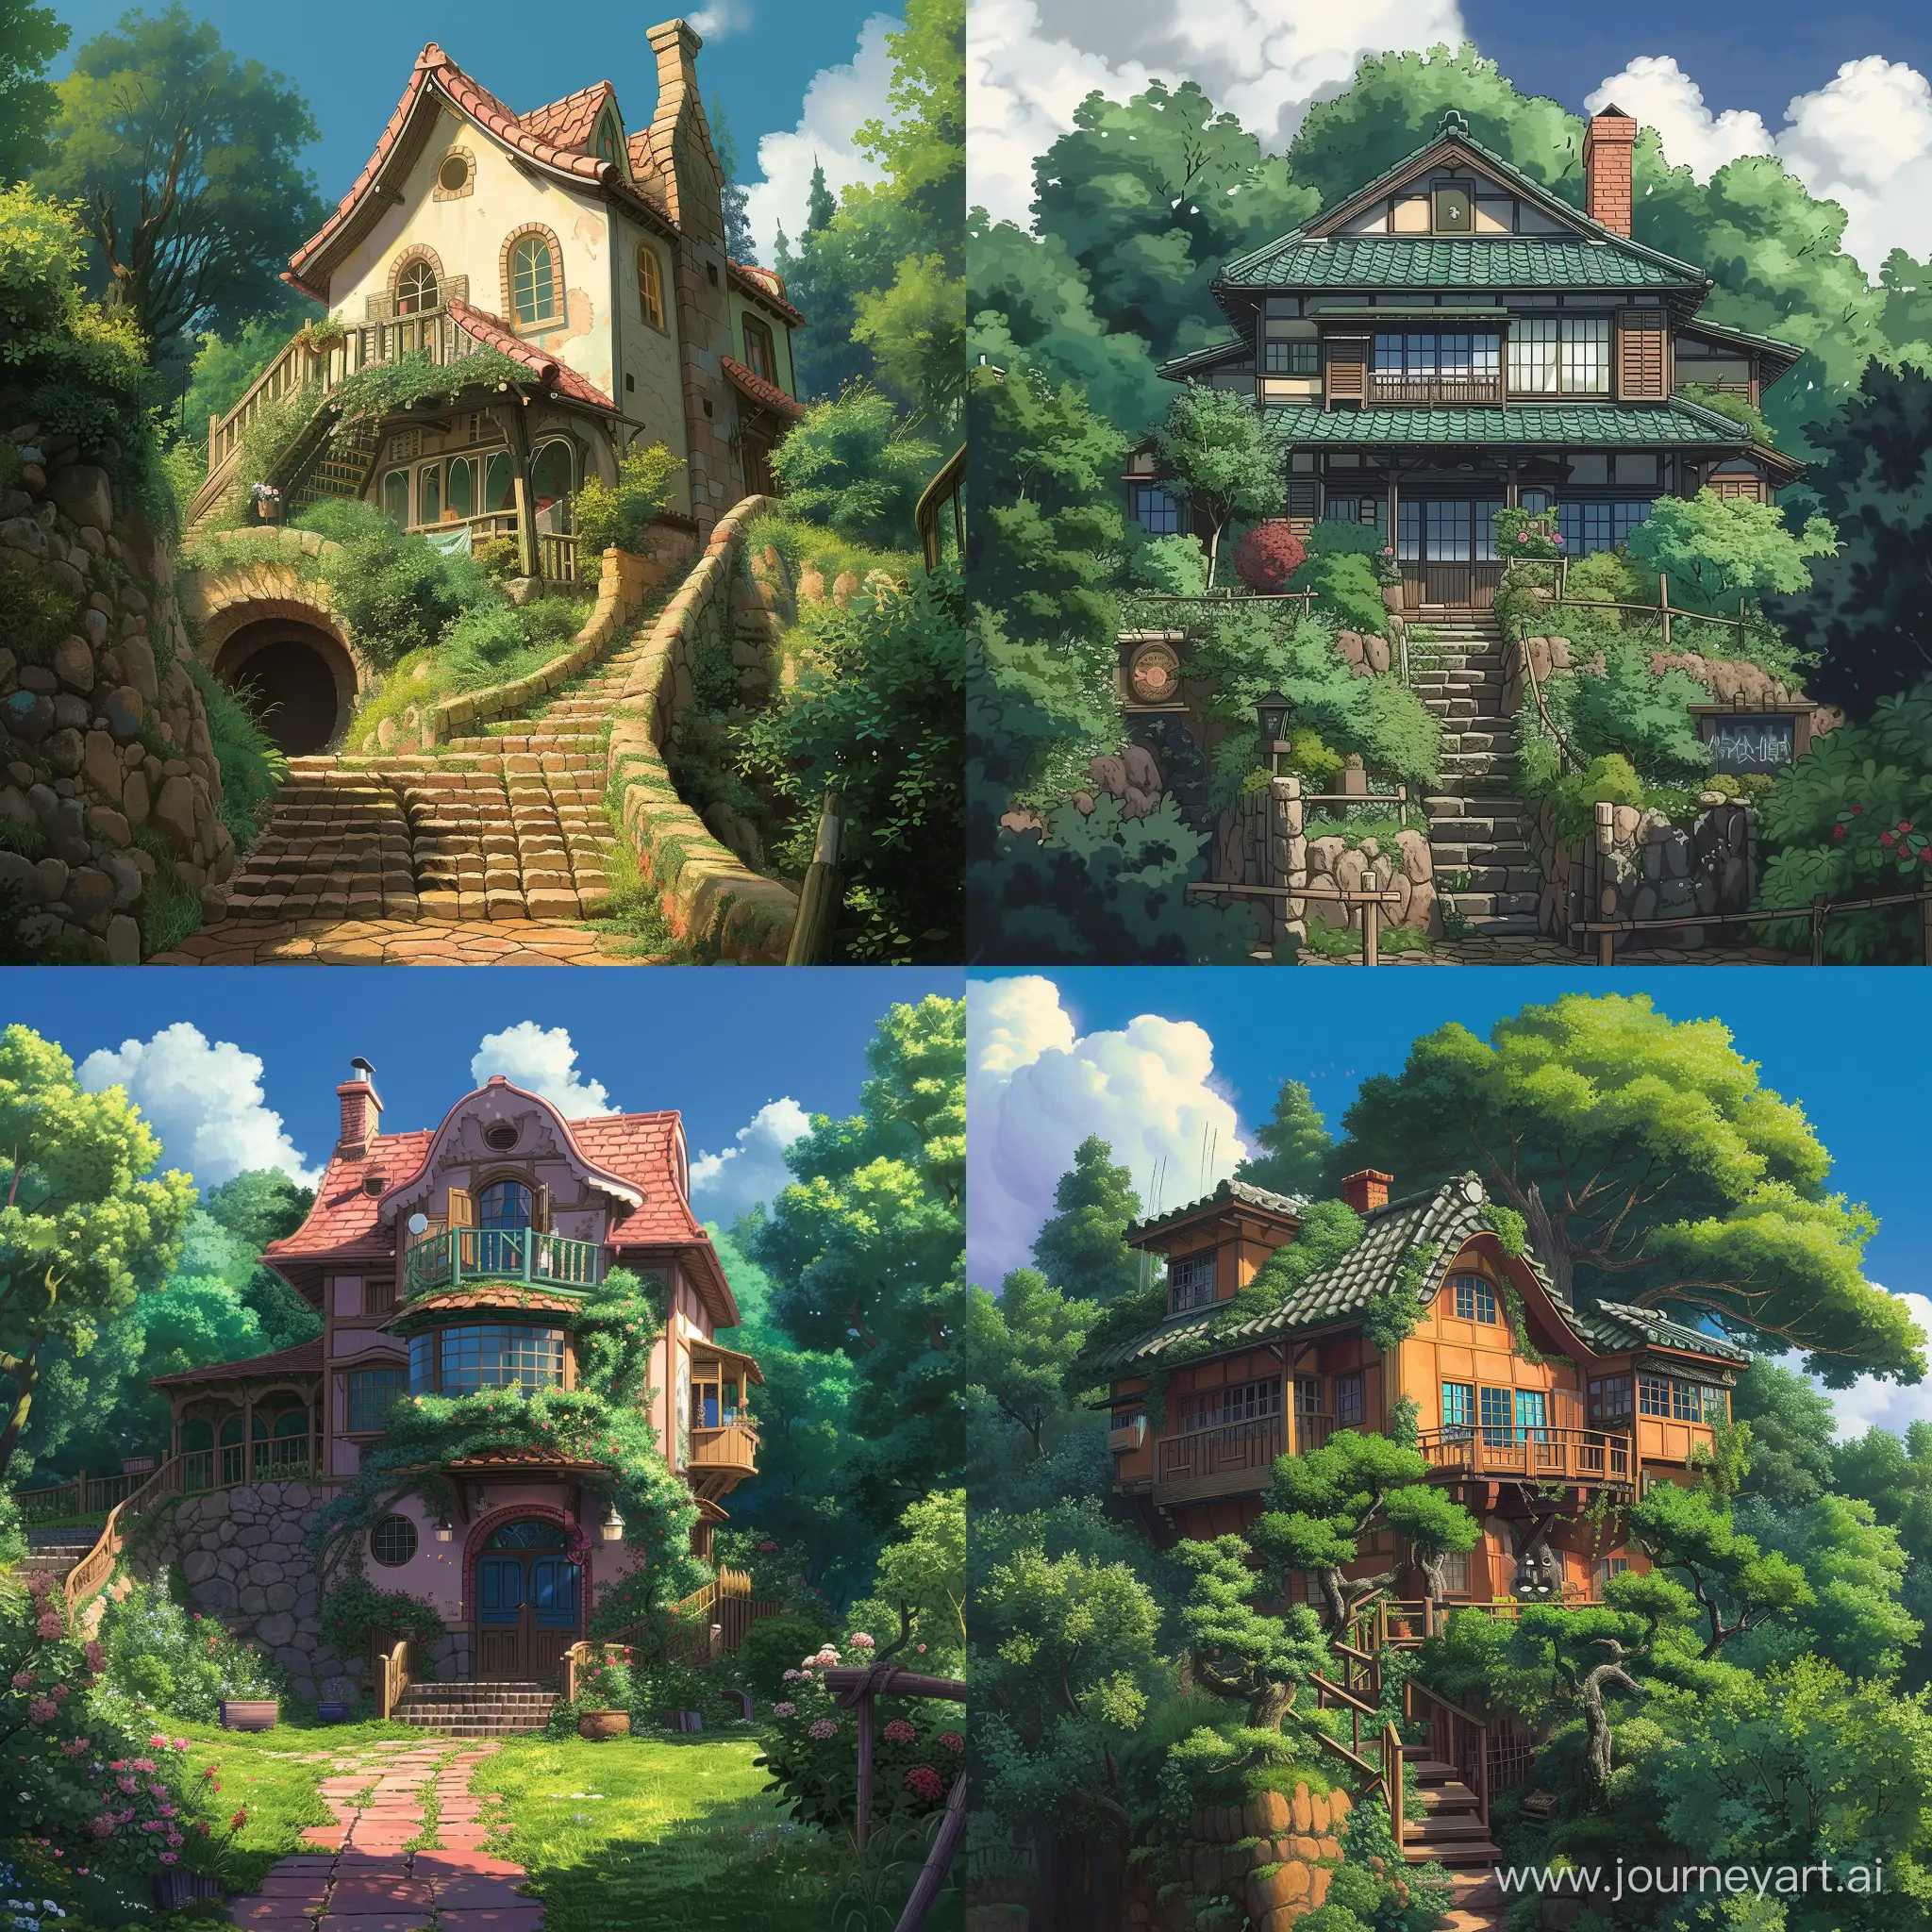 GhibliInspired-Anime-House-with-Vibrant-Colors-and-Unique-Design